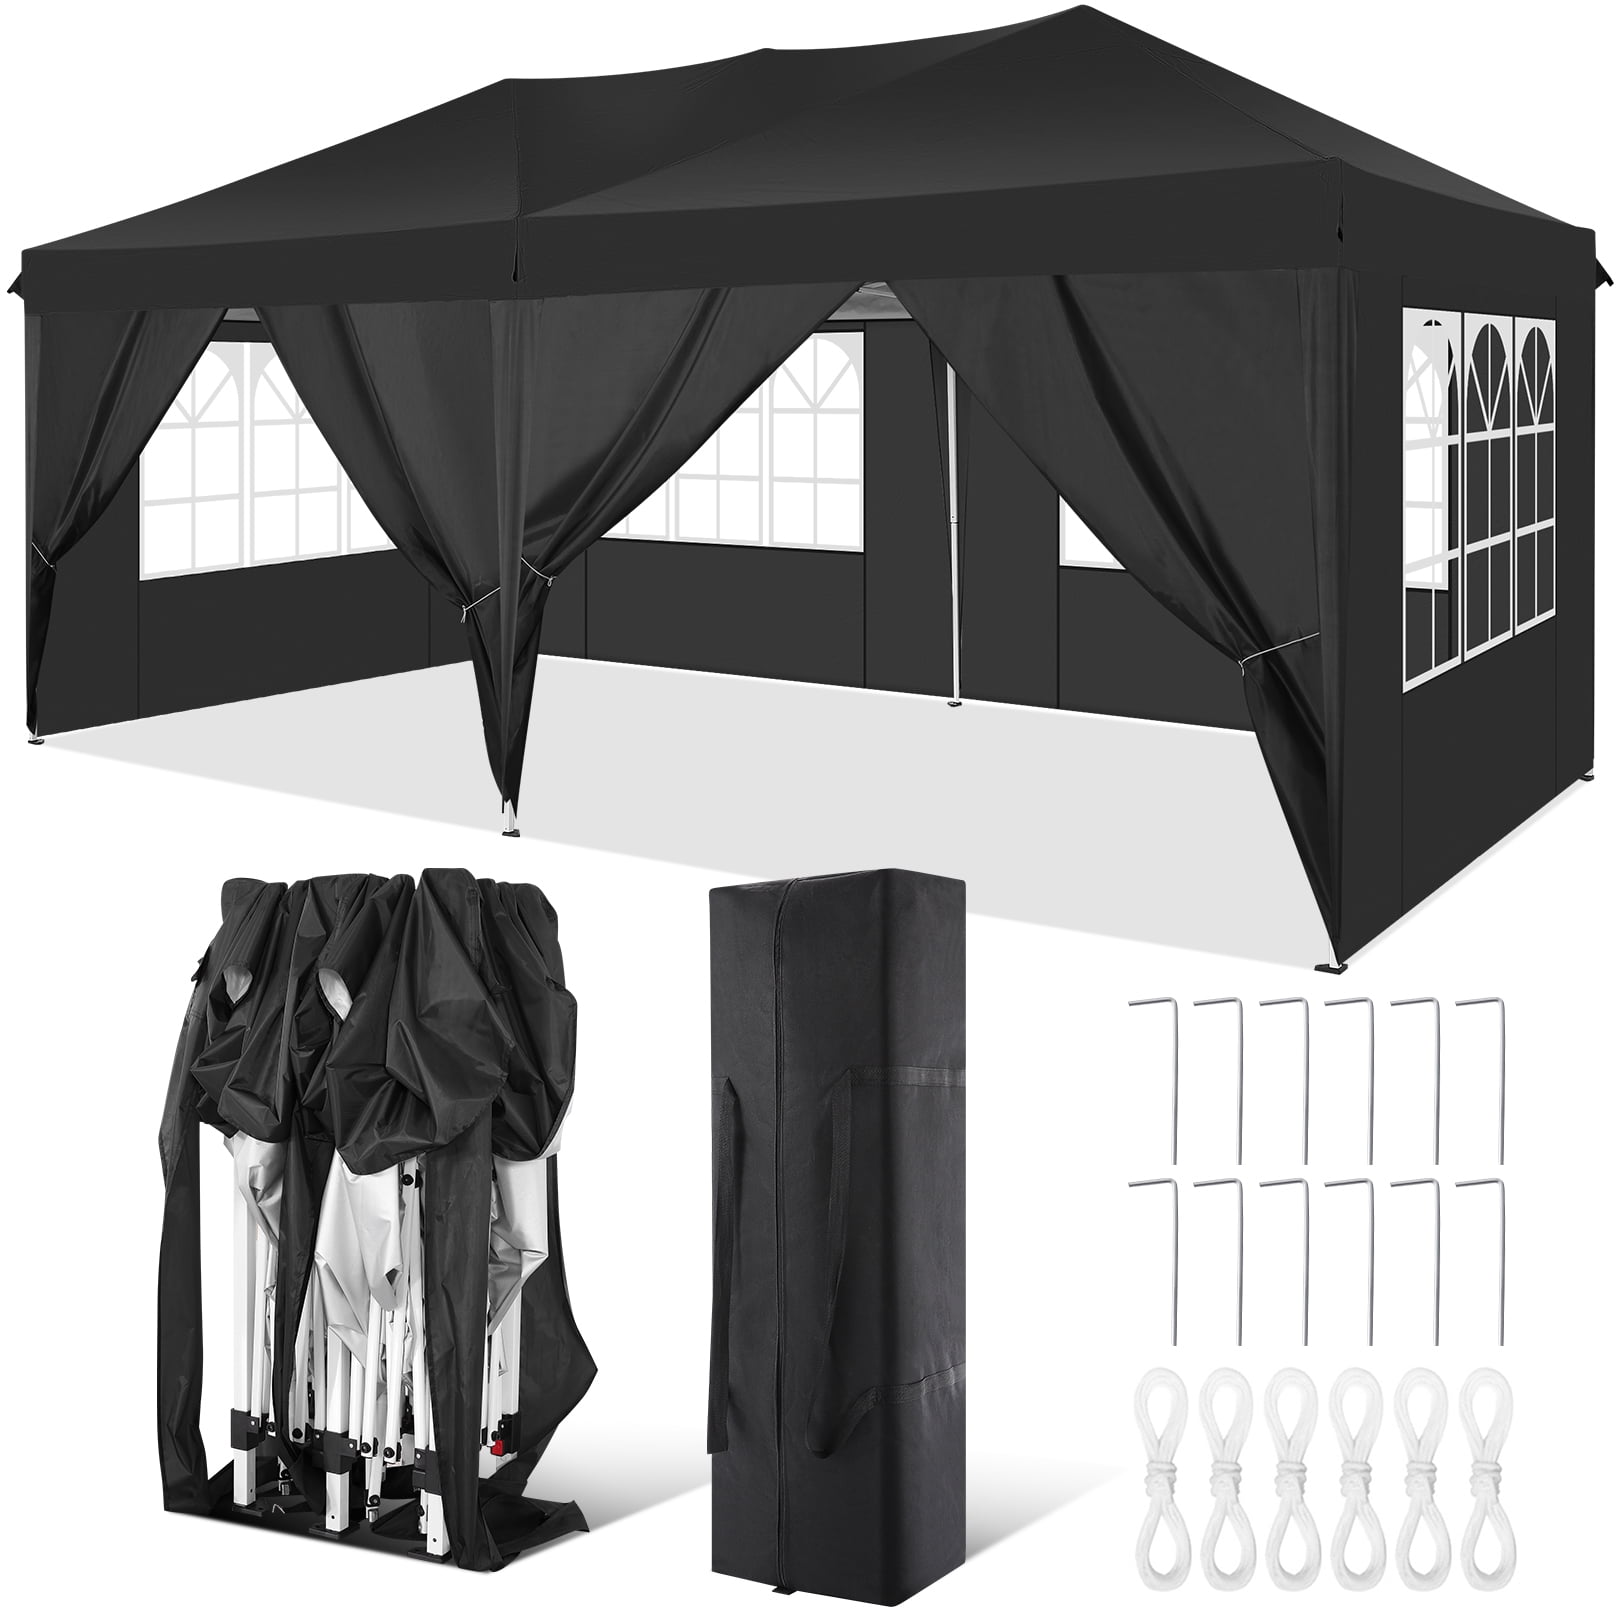 frequentie Jachtluipaard pijpleiding 10' x 20' EZ Pop Up Canopy Tent Party Tent Outdoor Event Instant Tent  Gazebo with 6 Removable Sidewalls and Carry Bag, Black - Walmart.com